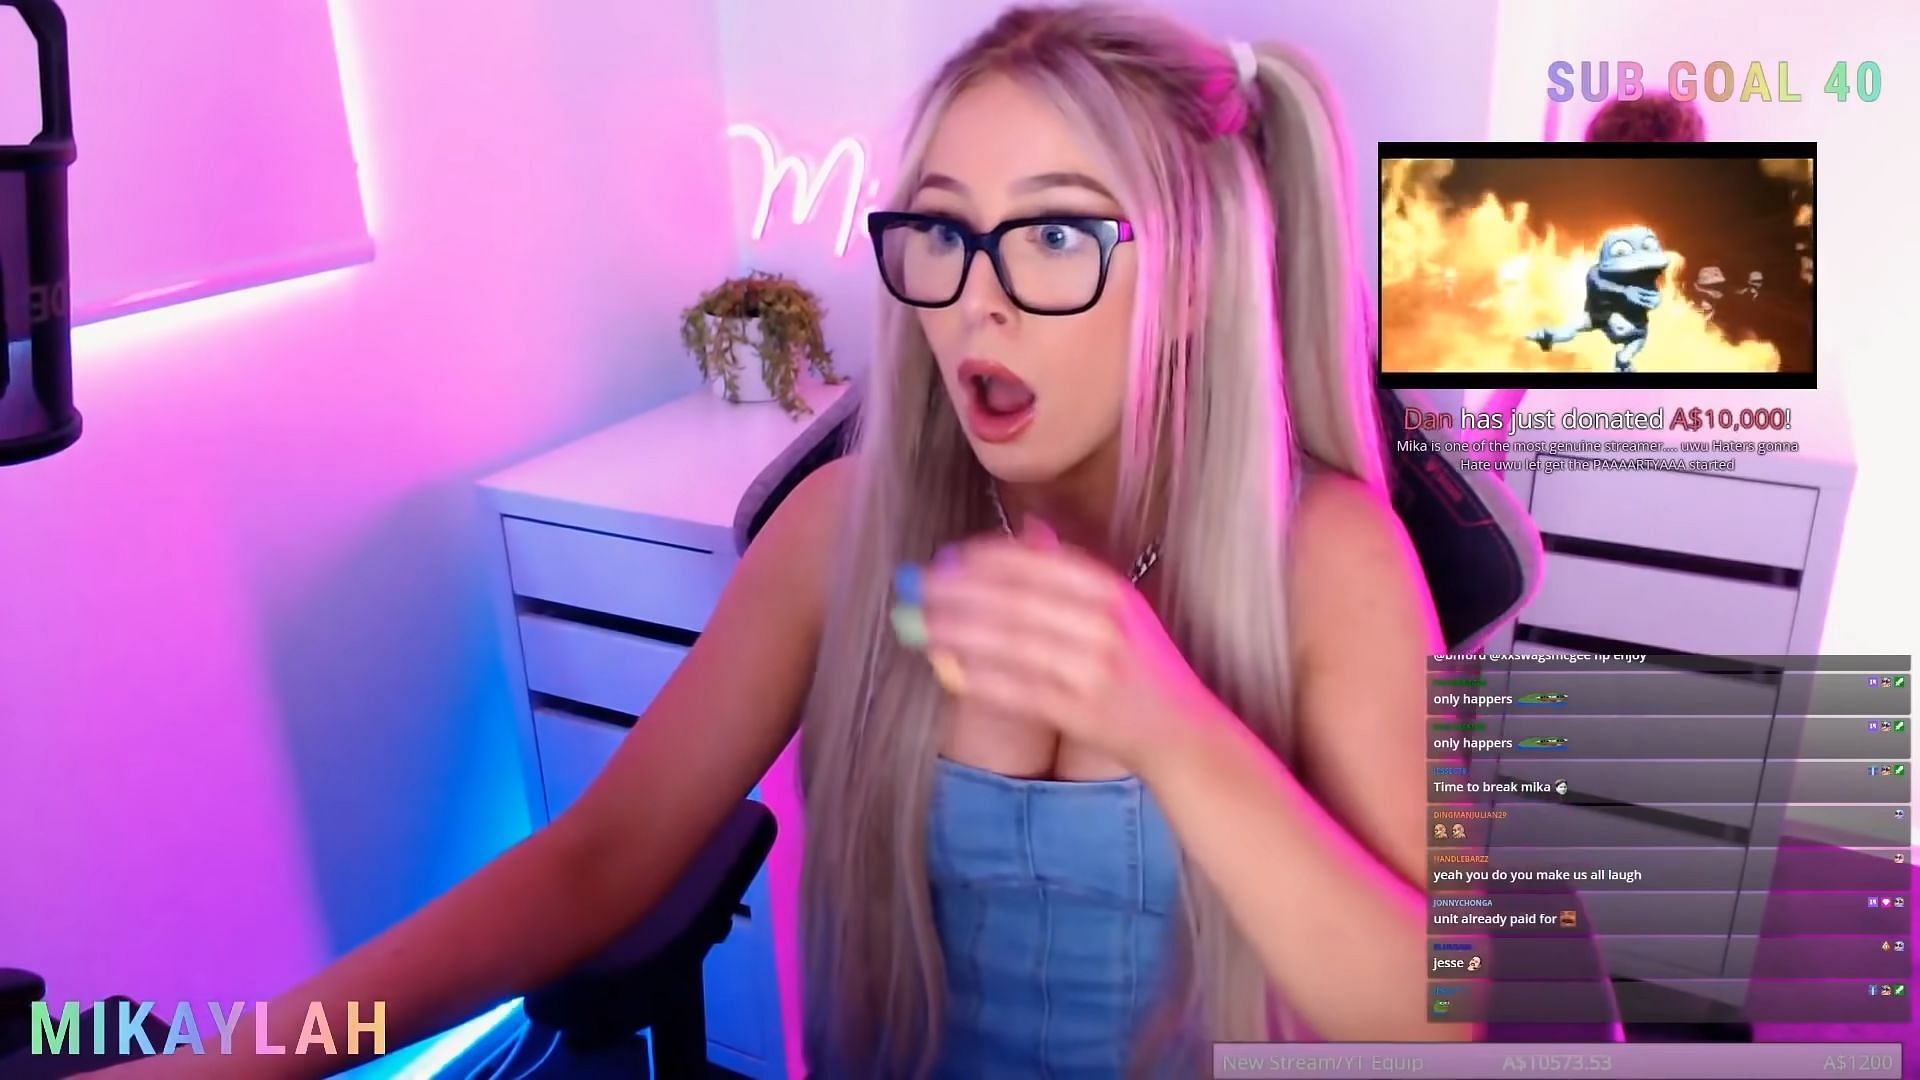 5 Female Twitch Streamers Who Received Insane Donations On Stream